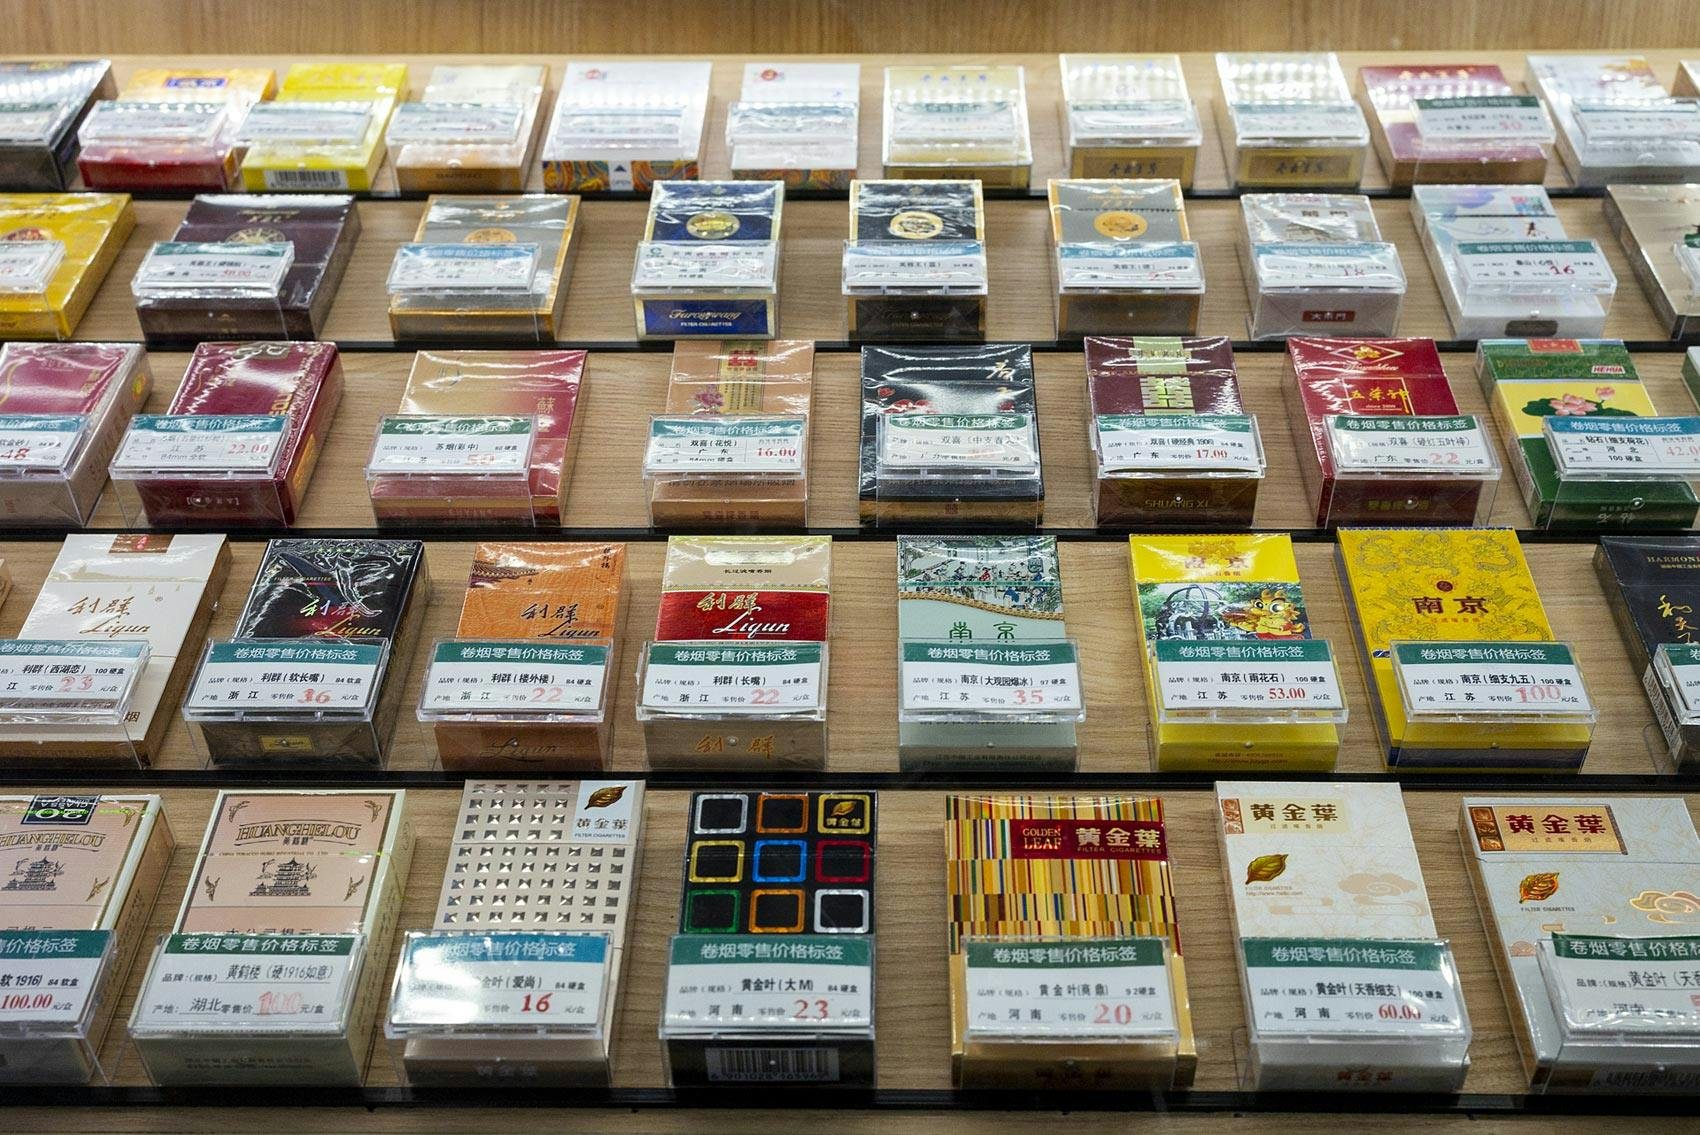 A kiosk selling different brands of cigarettes in Shenzhen, China